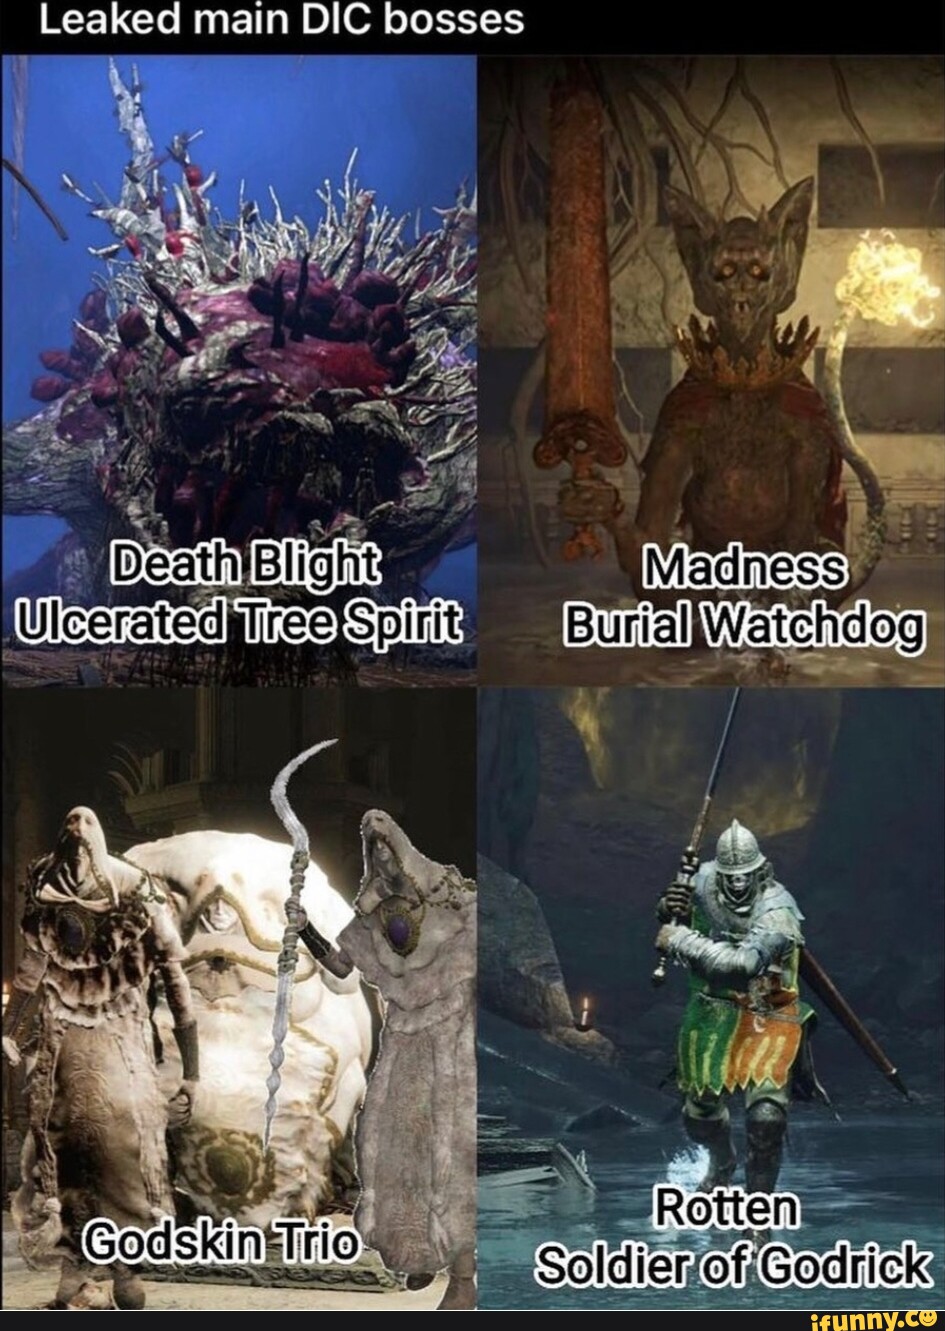 Leaked main DIC bosses Deatin Blight Madness